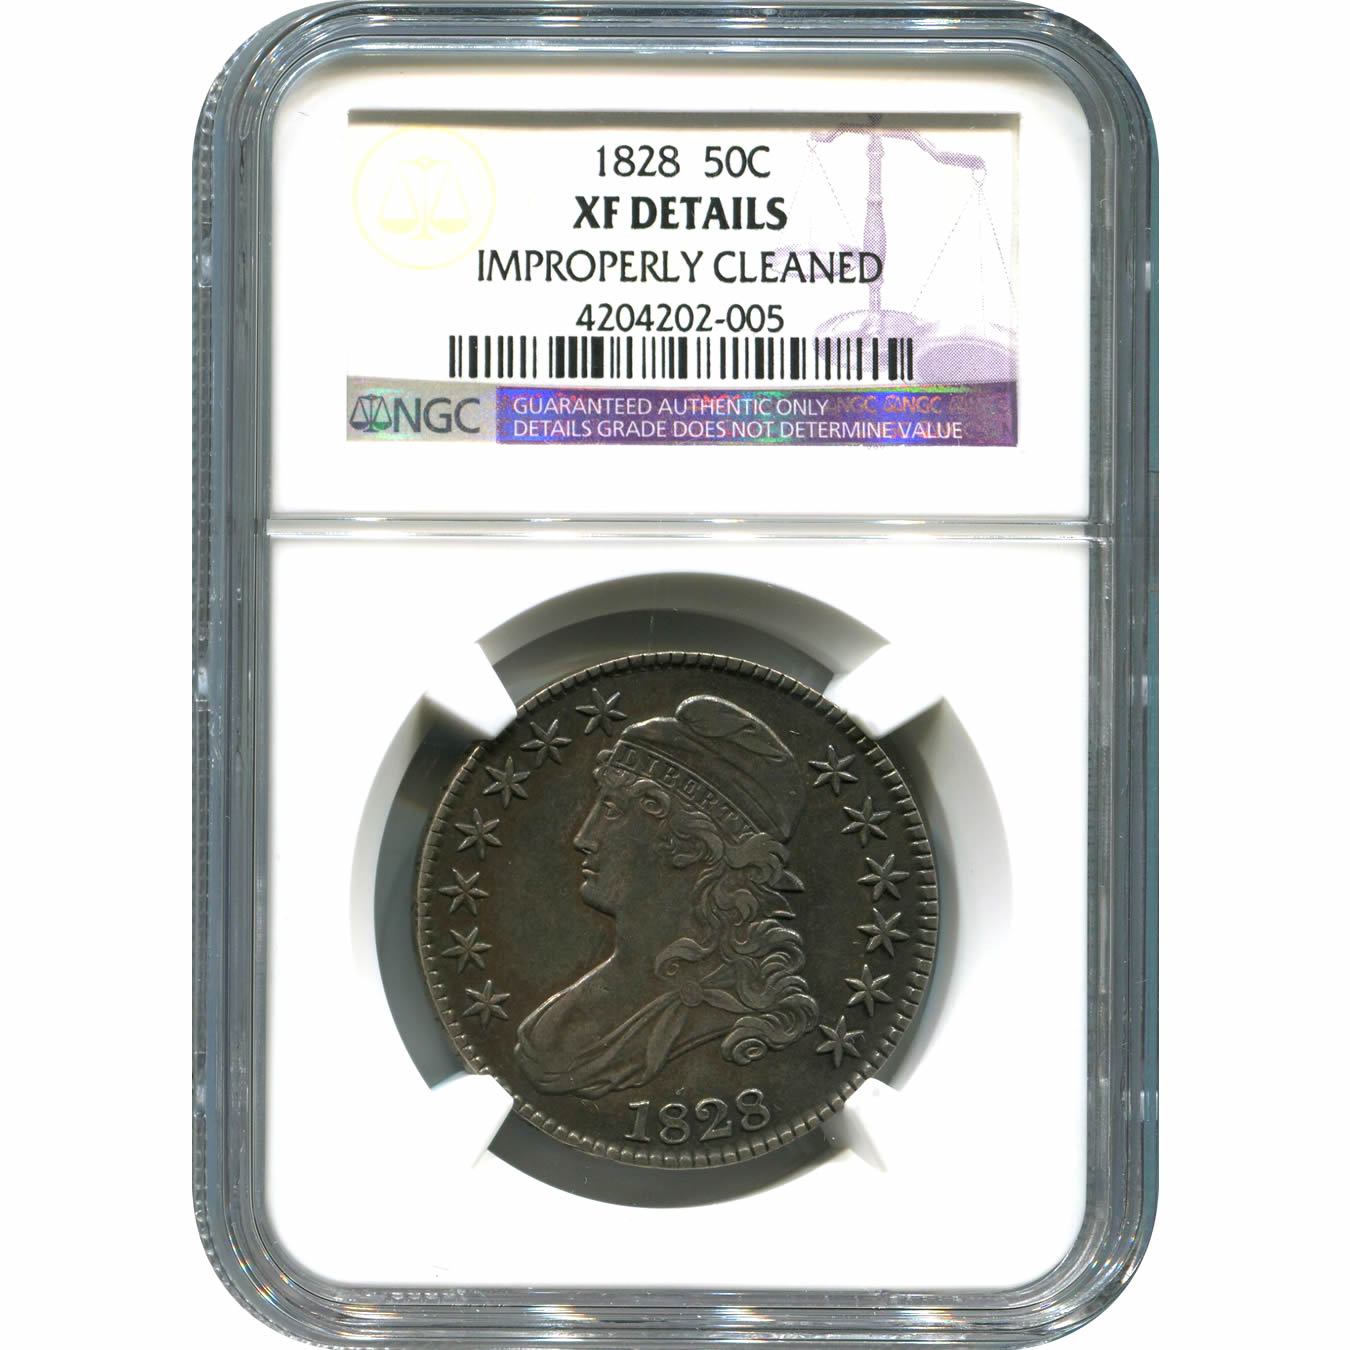 Certified Bust Half Dollar 1828 XF Details (Improperly Cleaned) NGC